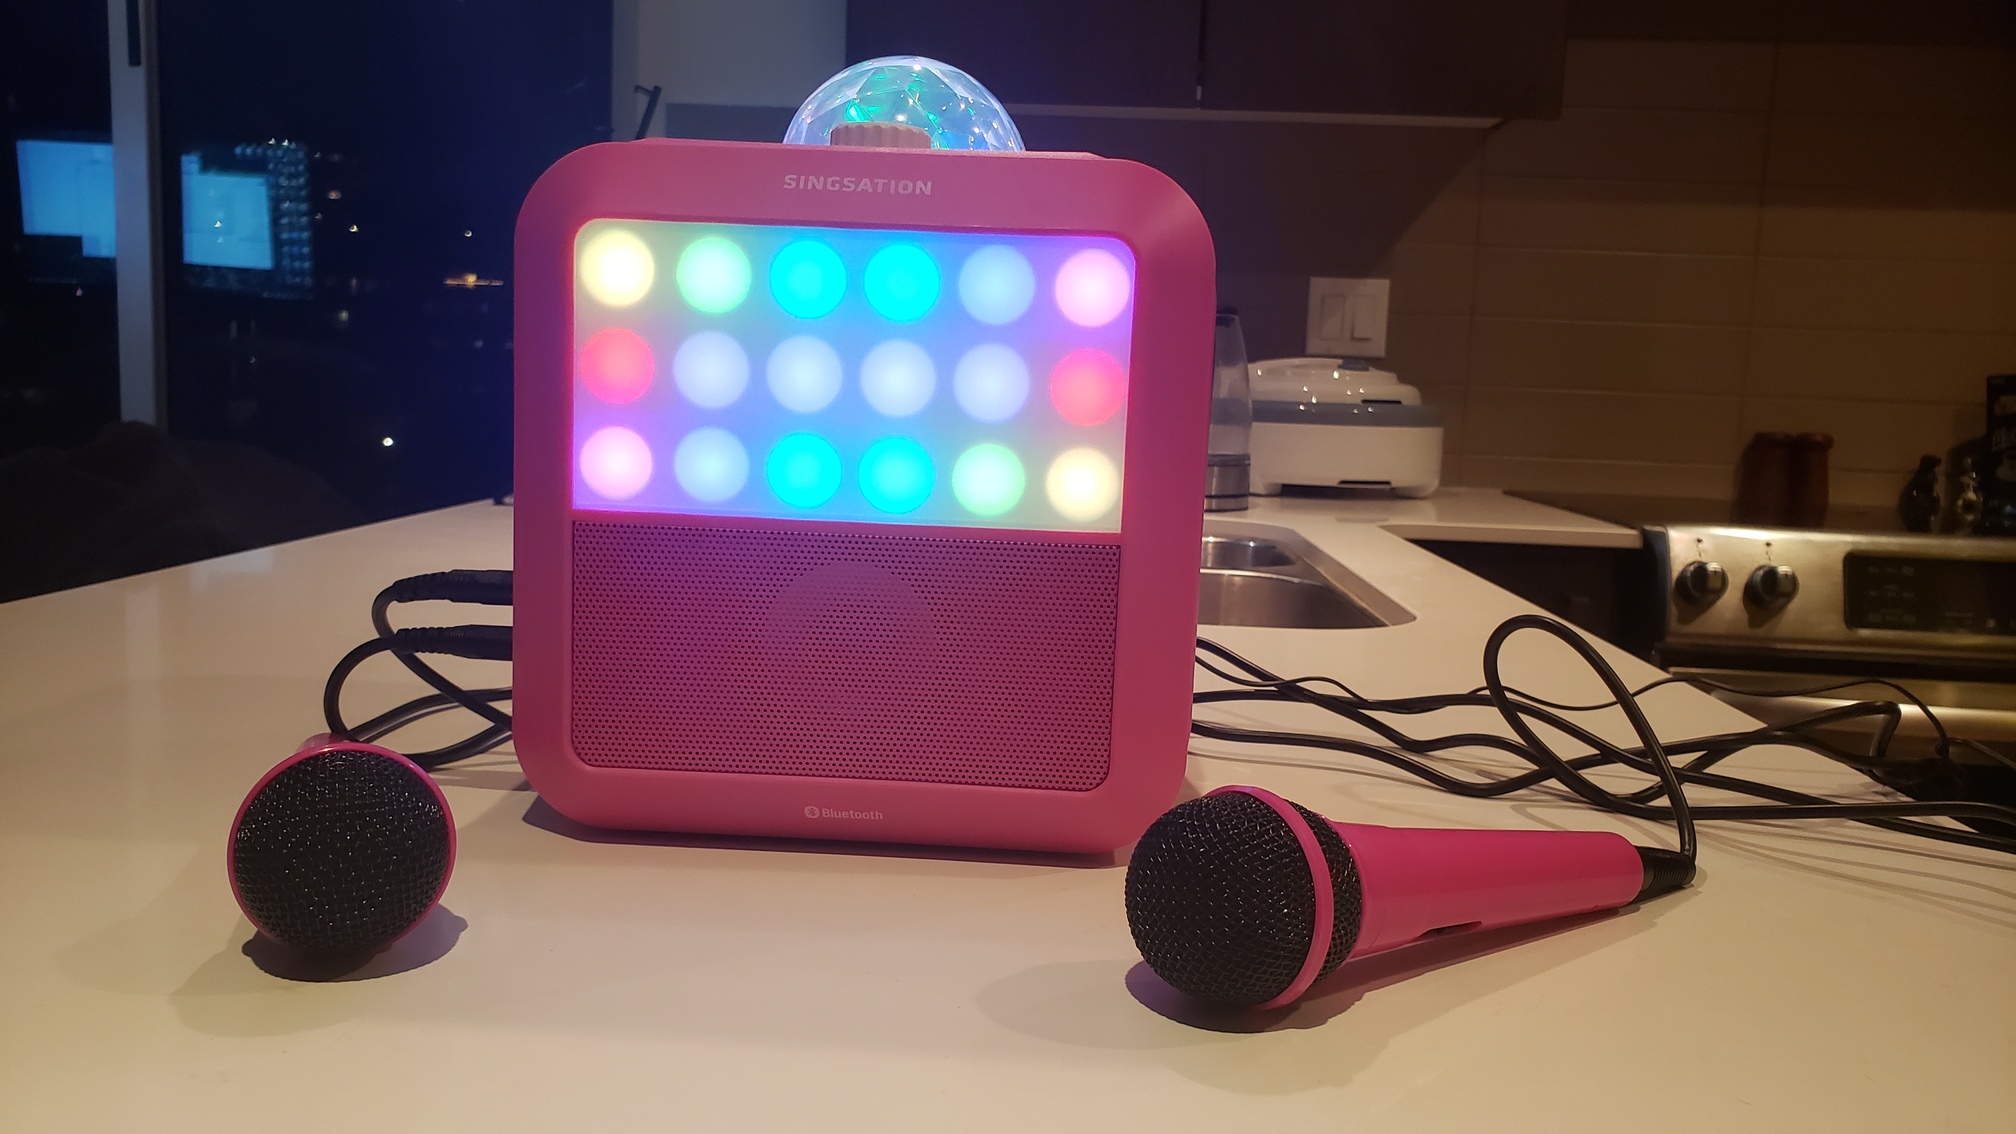 The Singsation Starburst All-in-One Party System with microphones